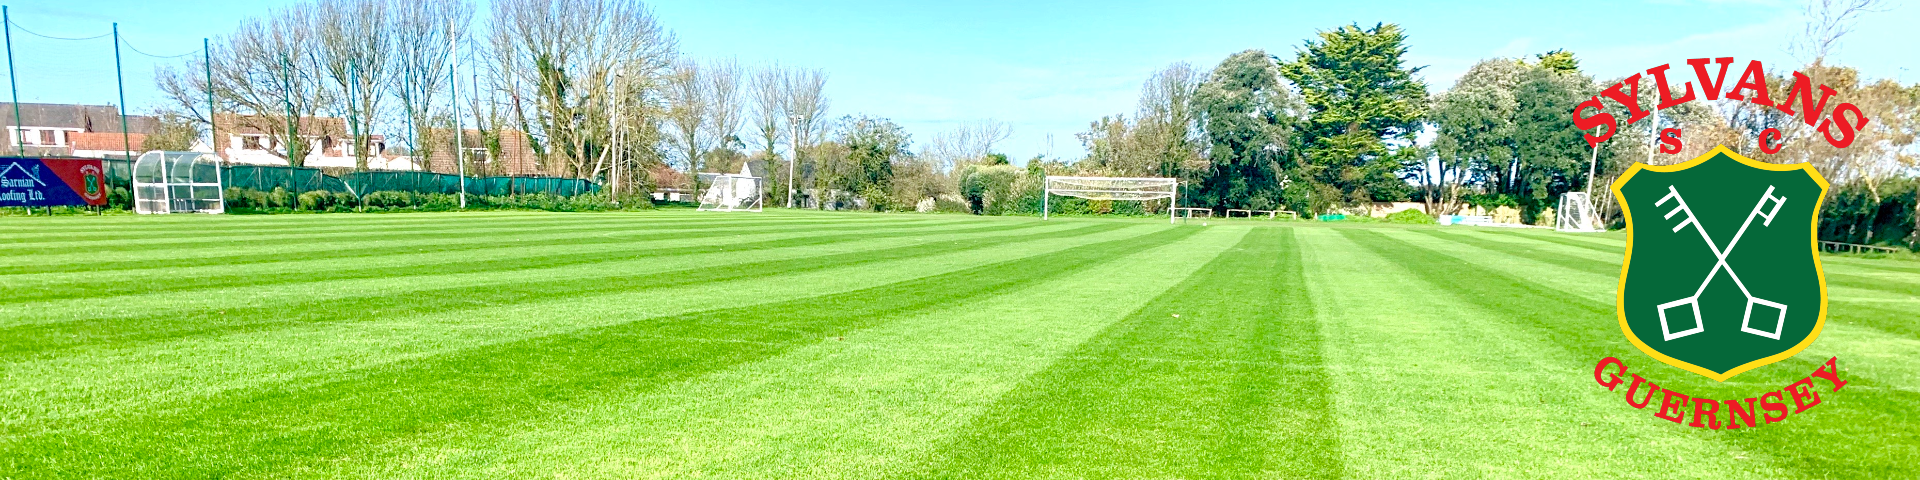 SYLVANS SPORTS CLUB GUERNSEY |    FOUNDED 1922